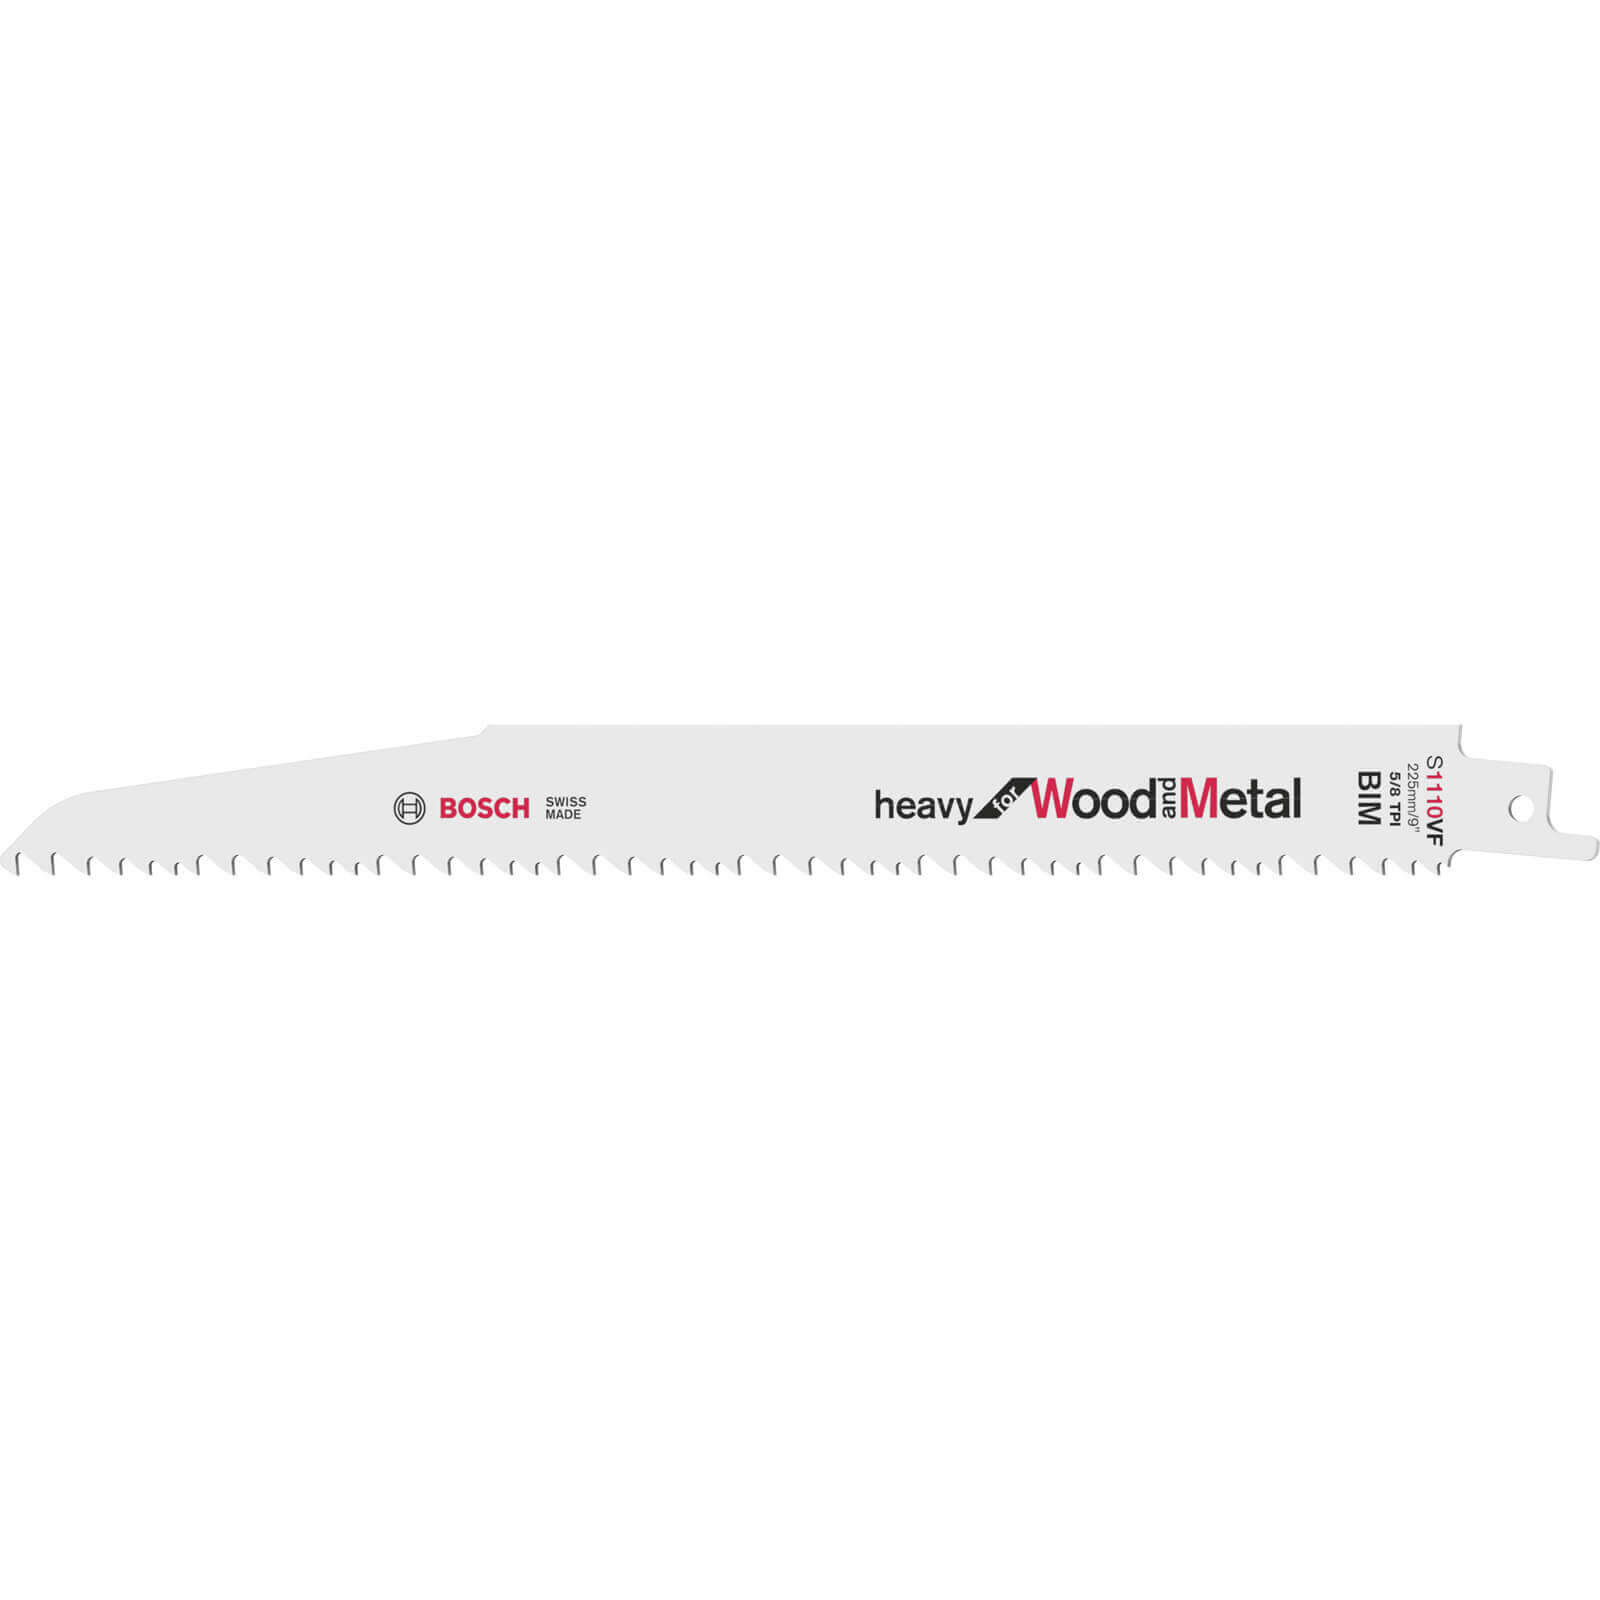 Image of Bosch S1110VF Wood and Metal Cutting Reciprocating Sabre Saw Blades Pack of 5